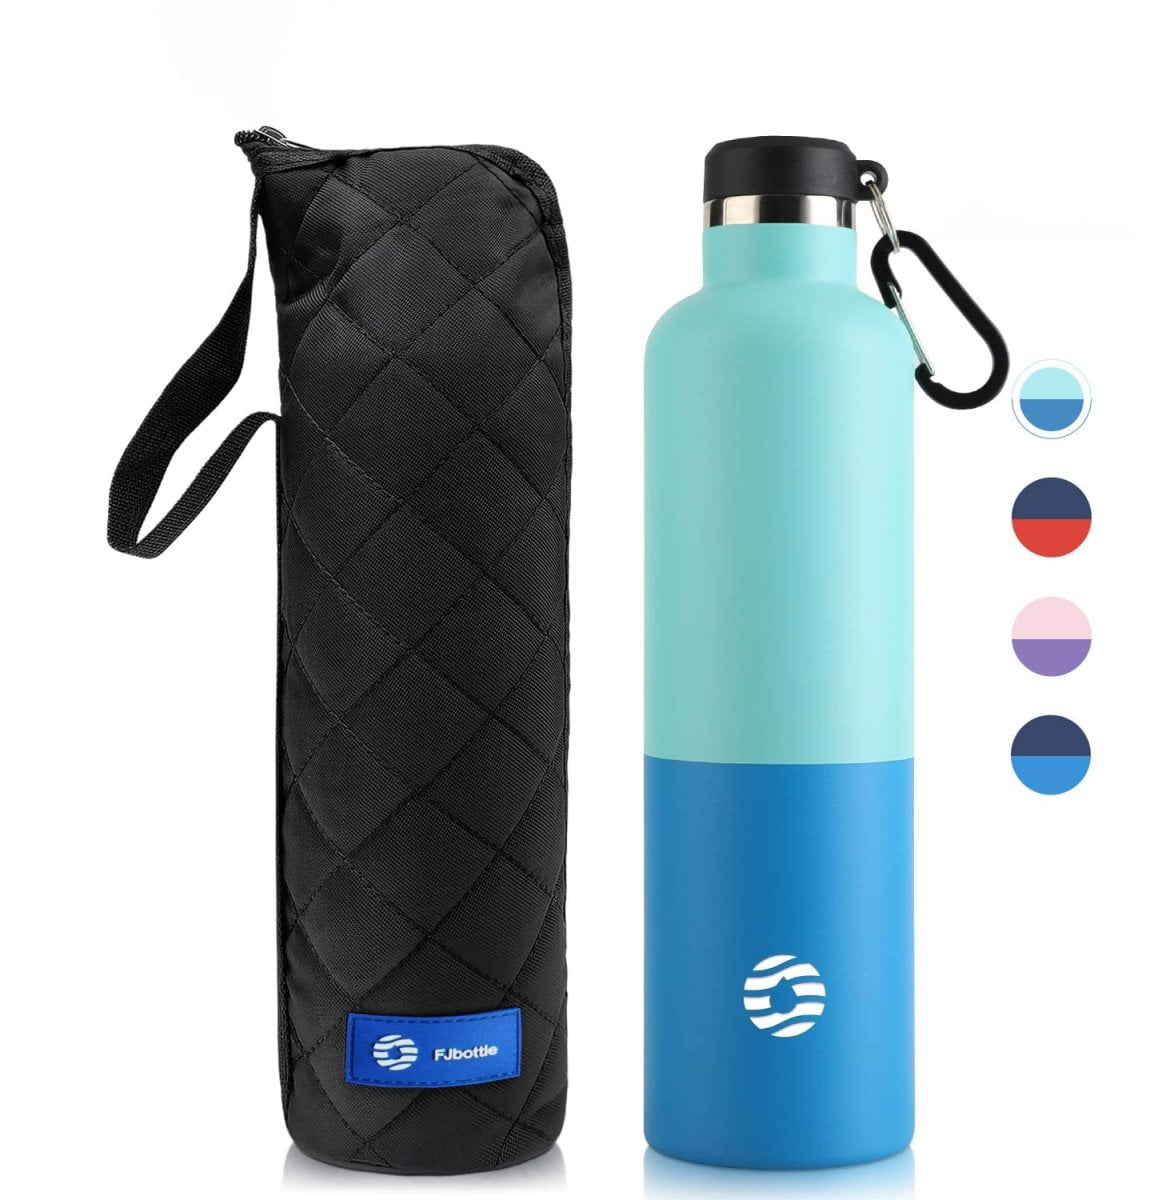 20 oz-25 oz Double Wall Vacuum Insulated Stainless Steel Bottle Keeps Hot and Cold FJbottle Insulated Water Bottles with Straw With Cleaning Brush Perfect Gifts for Girl and Lady 